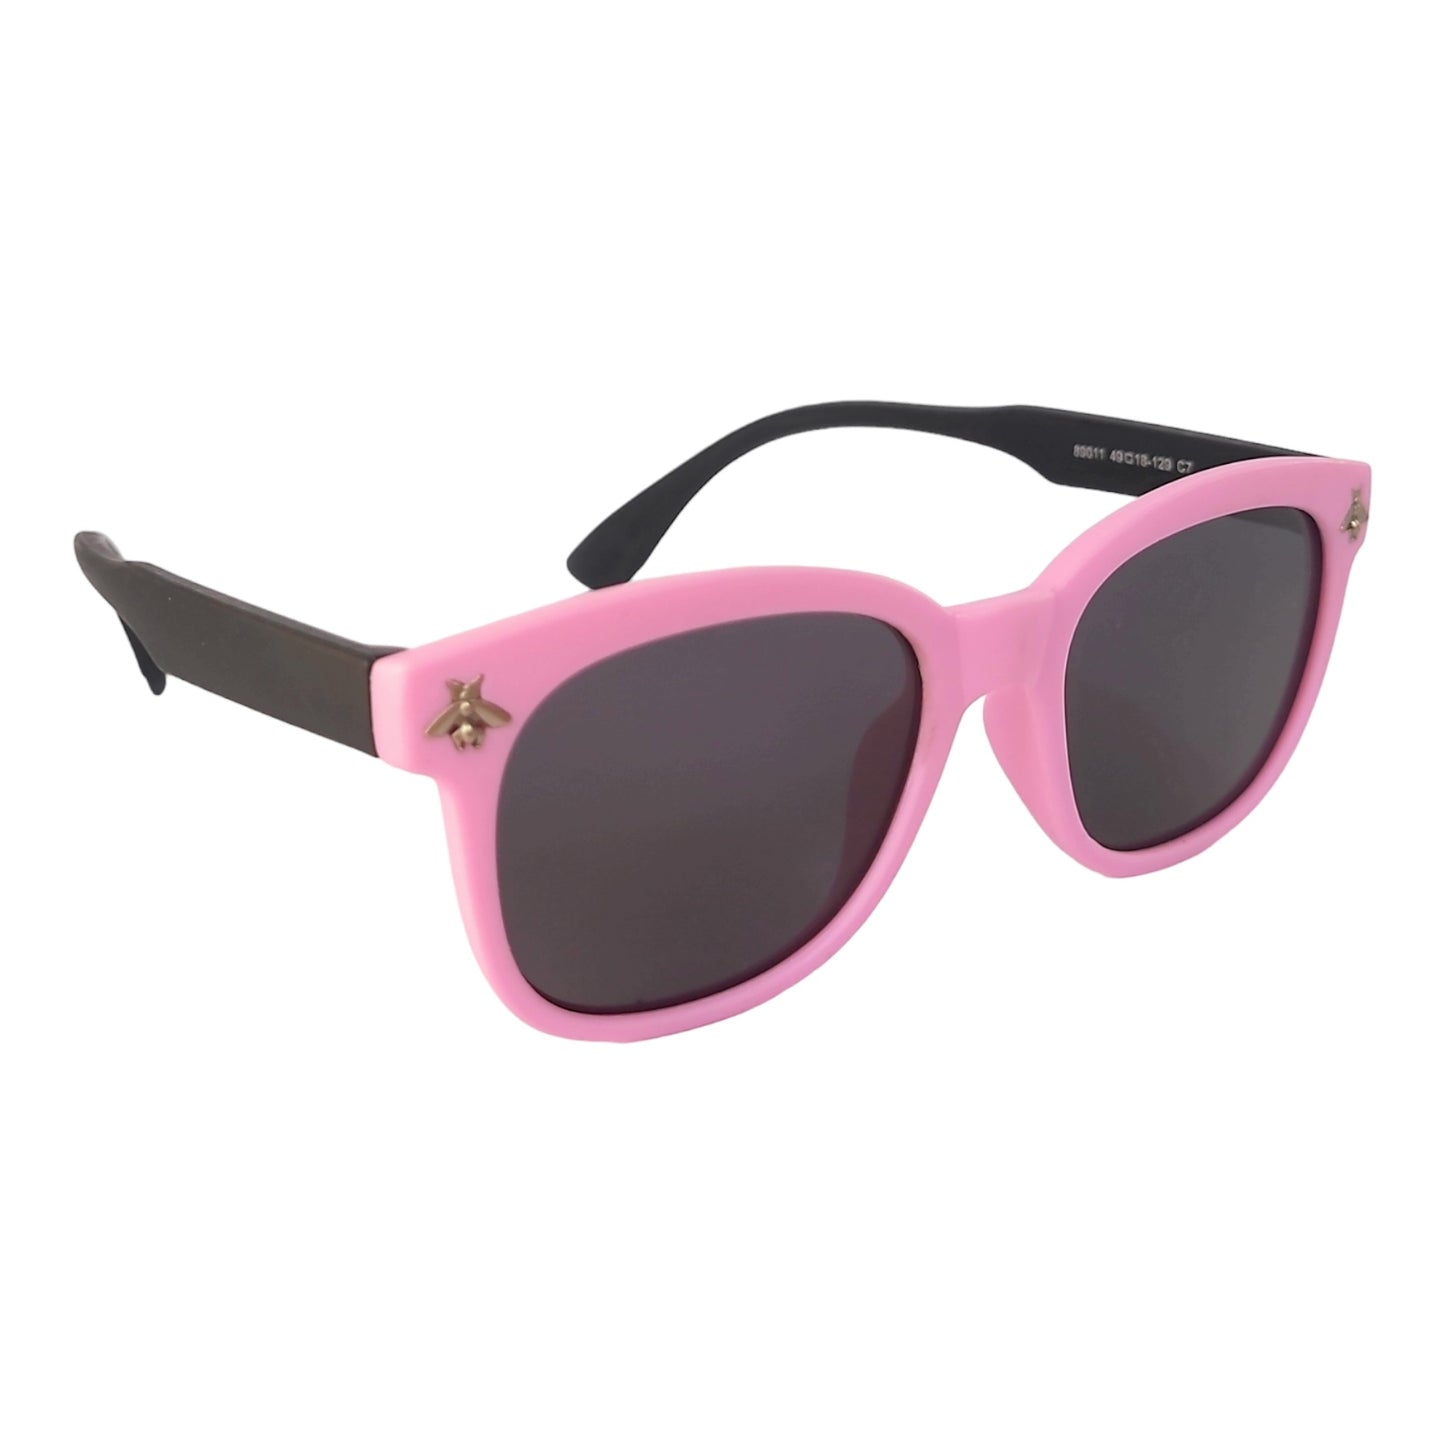 Stylish Kids Polarized Sunglasses for Shades Age 4-9 Years Old, Girl or Boy  | affaires-9011 - Purple-Black